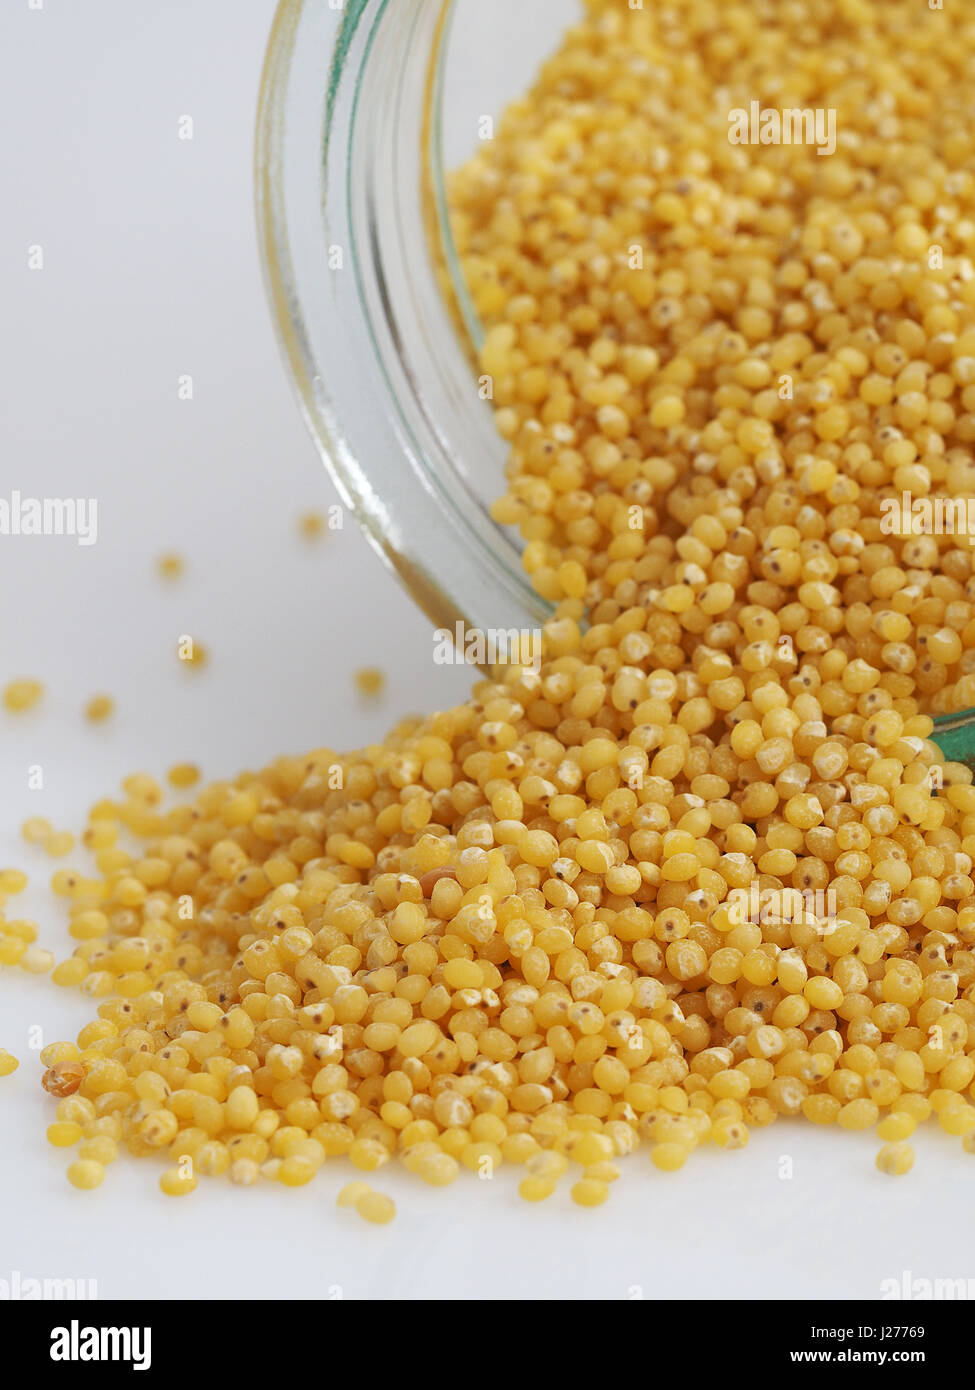 Millet on the white background Stock Photo